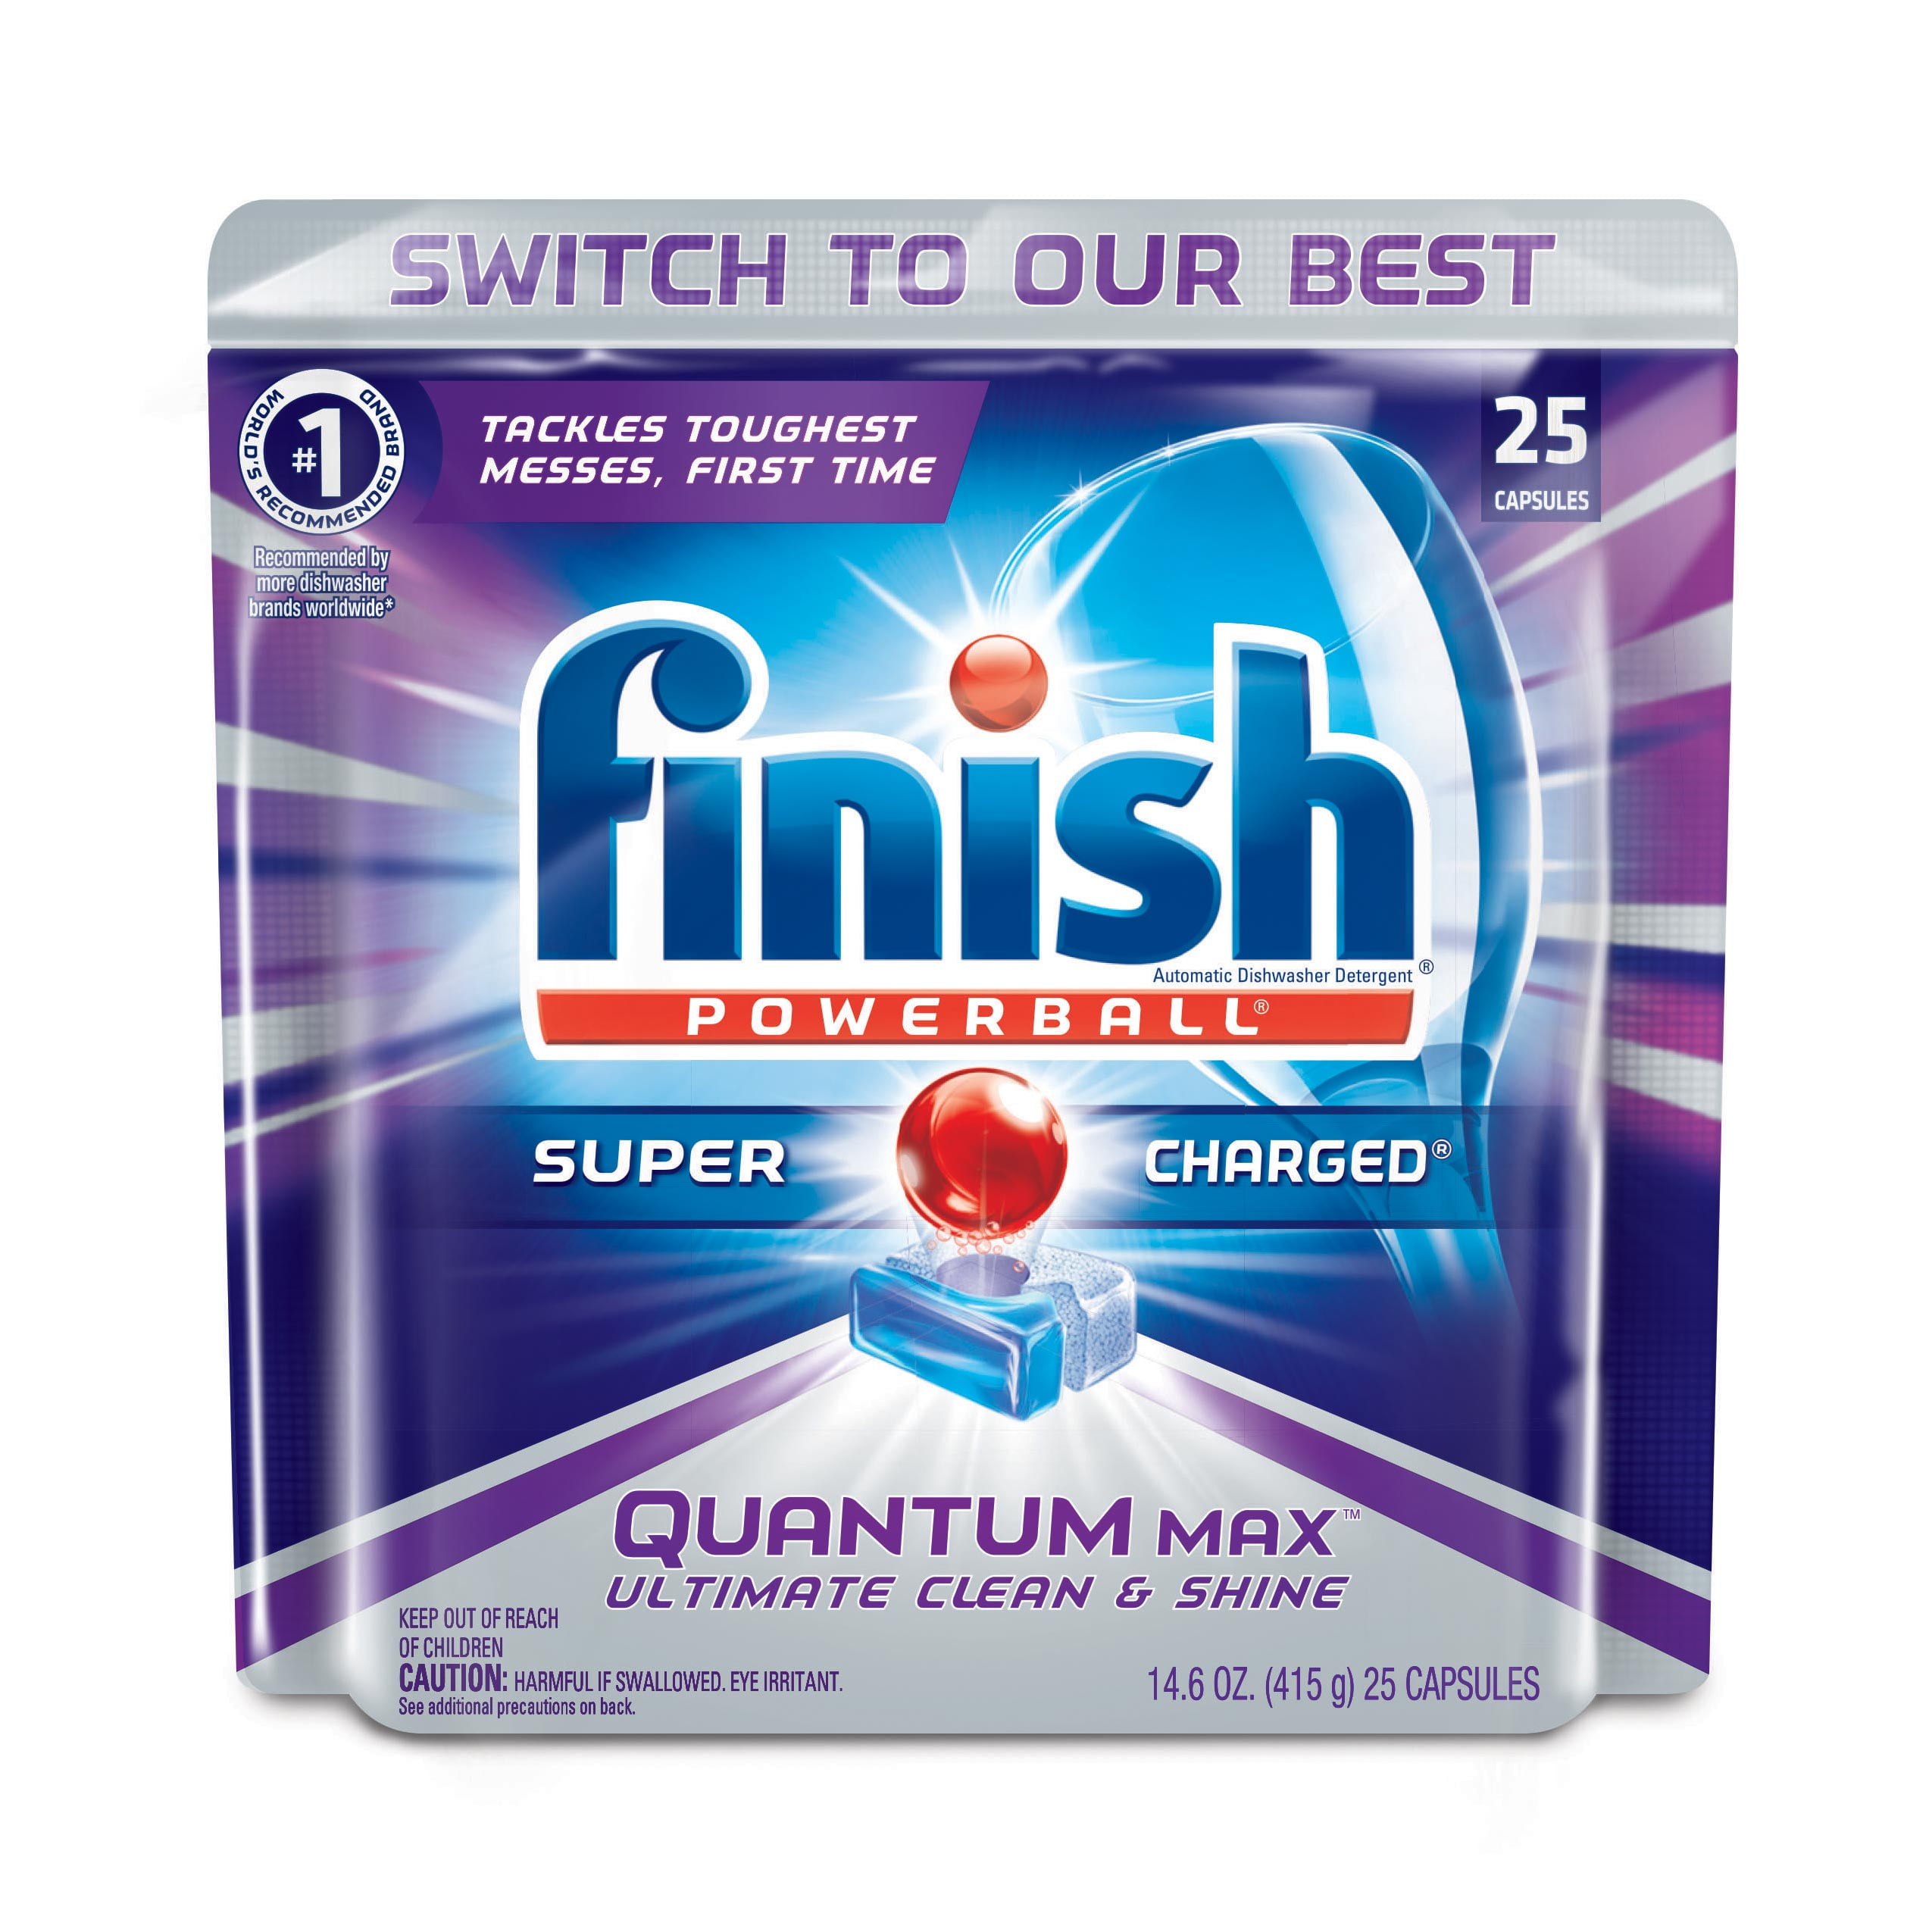 Detergent Powerball Dishwasher Tablets, Count 25 Quantum Finish Max